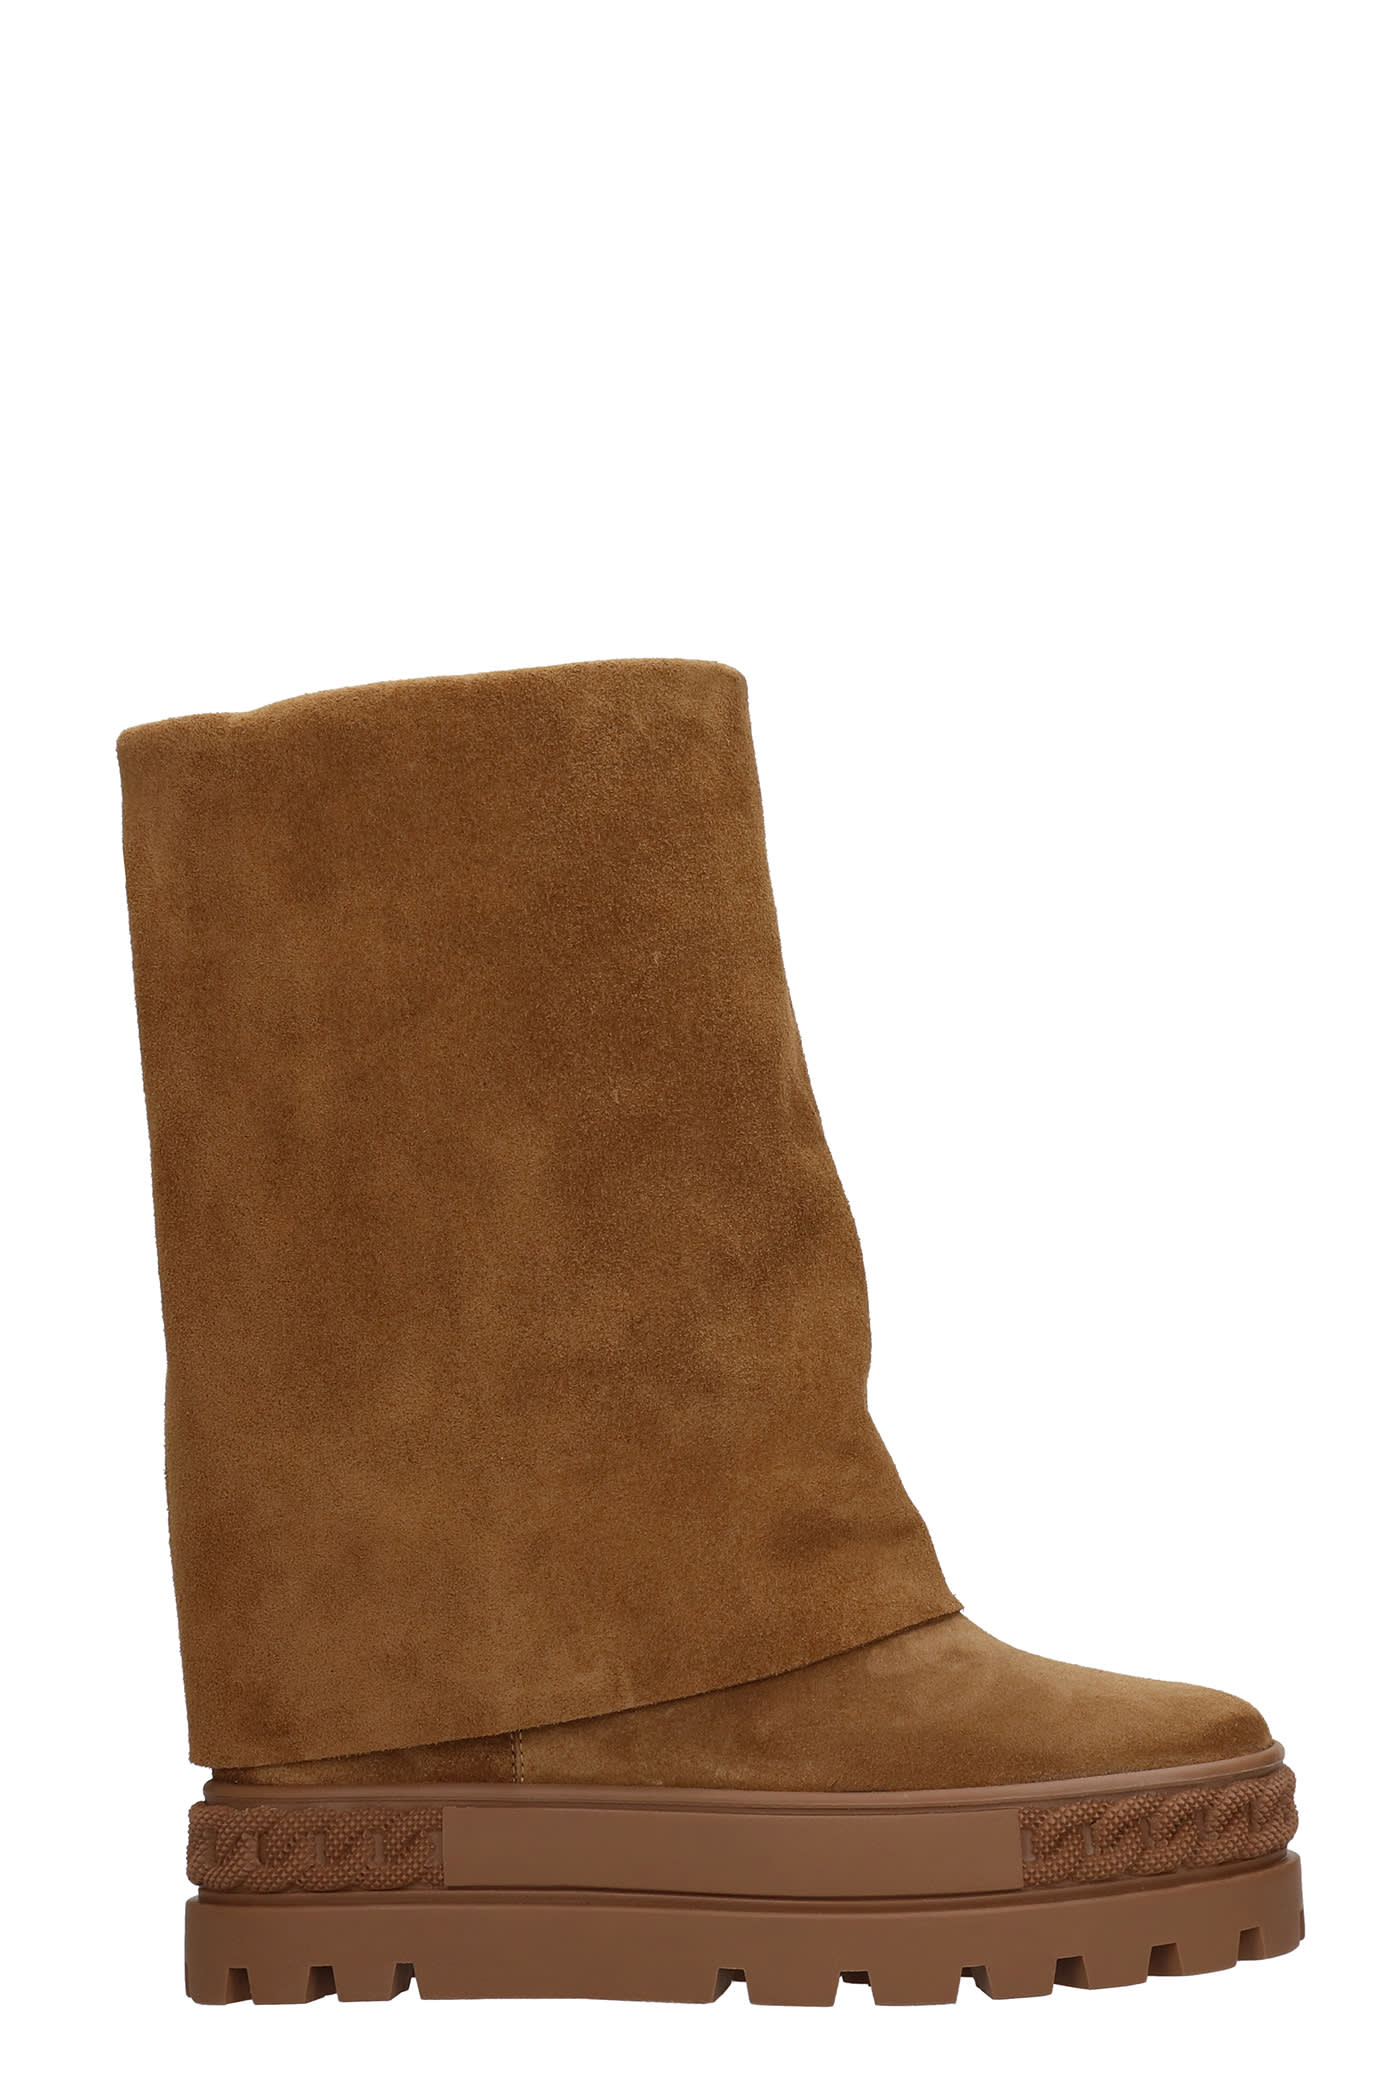 Casadei Low Heels Boots In Leather Color Suede